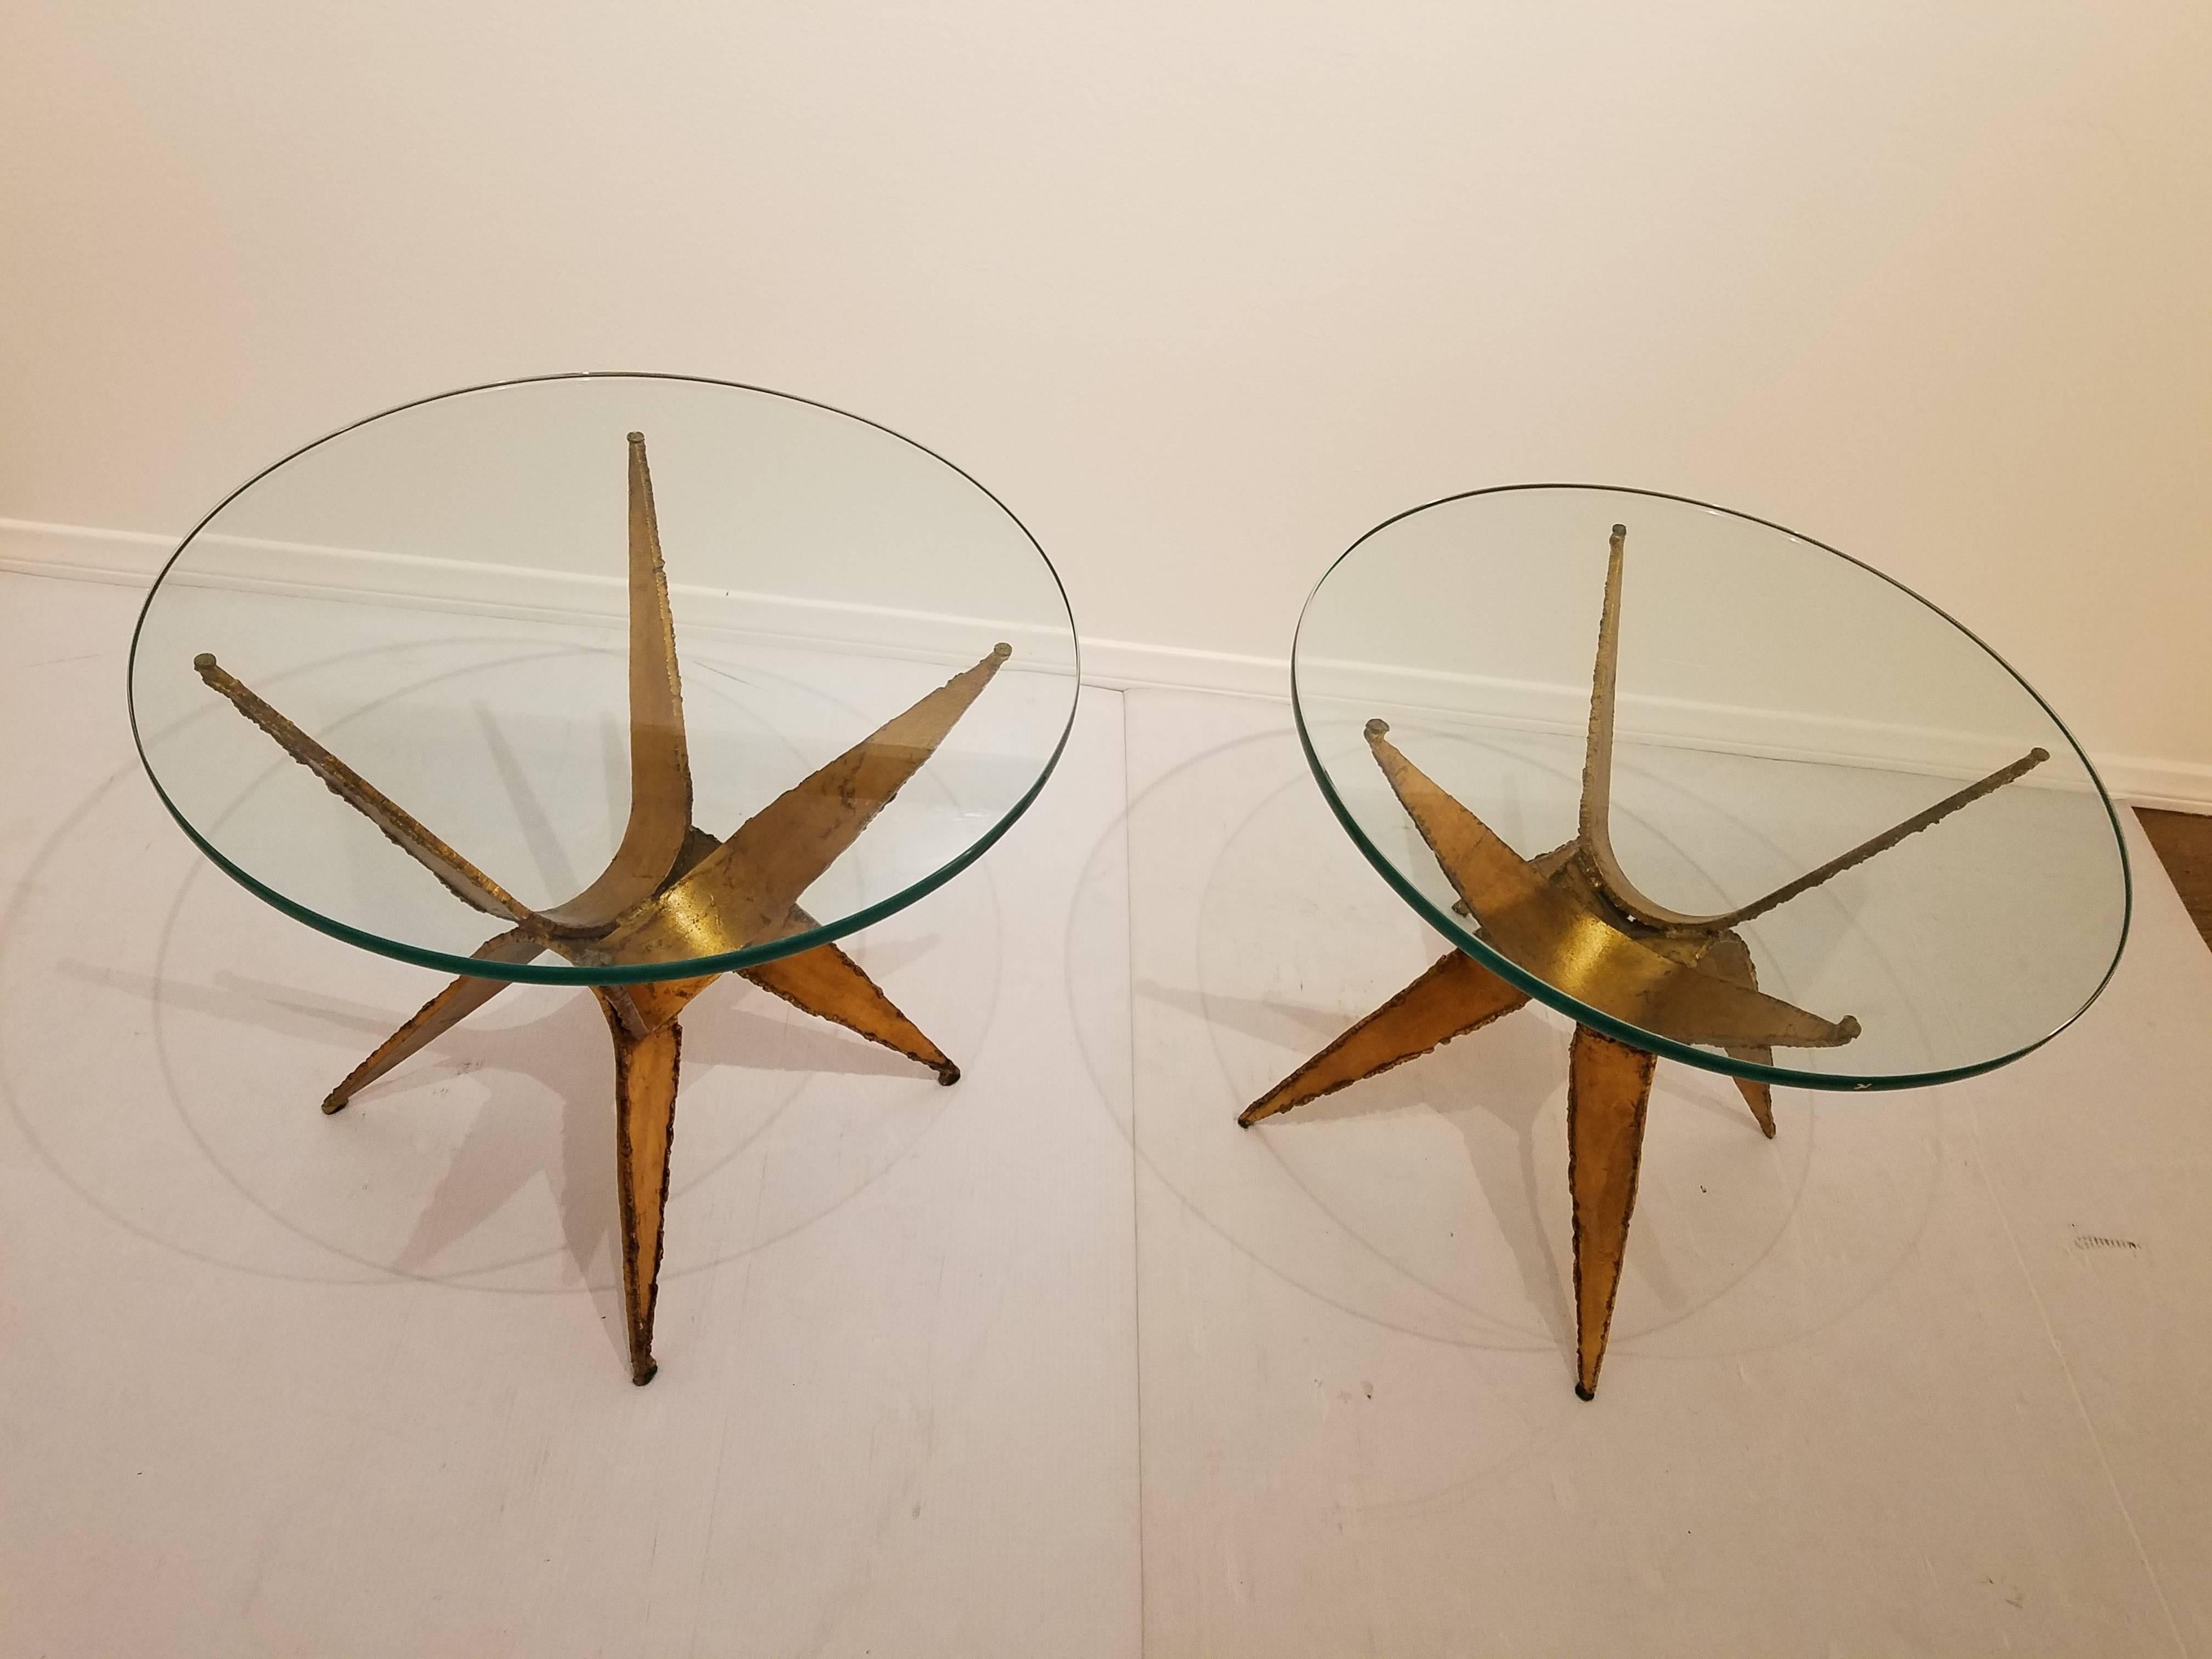 Brutalist Pair of Brutal Cocktail Tables Torch Cut Steel in Gold Leaf Finish